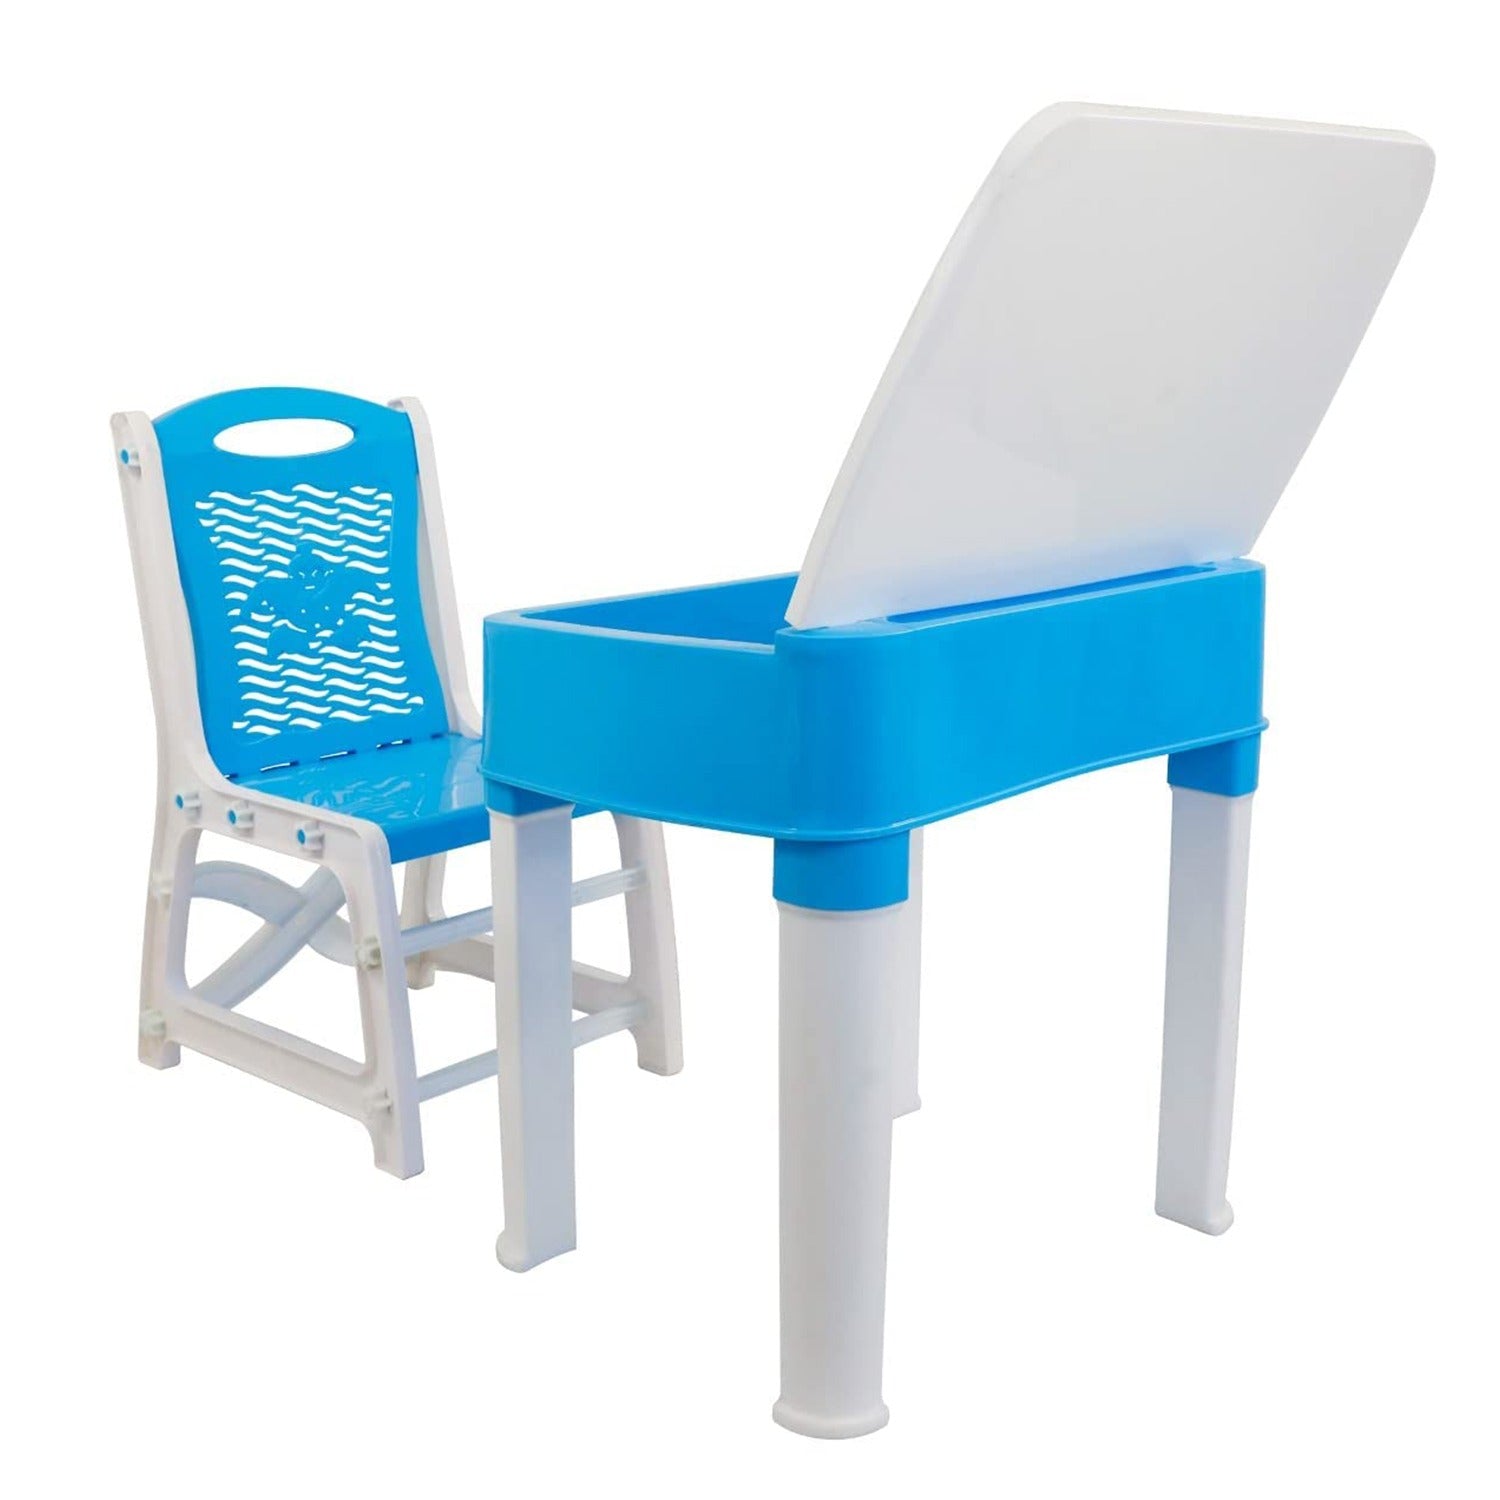 4594 Study Table And Chair Set For Boys And Girls With Small Box Space For Pencils Plastic High Quality Study Table (Blue)